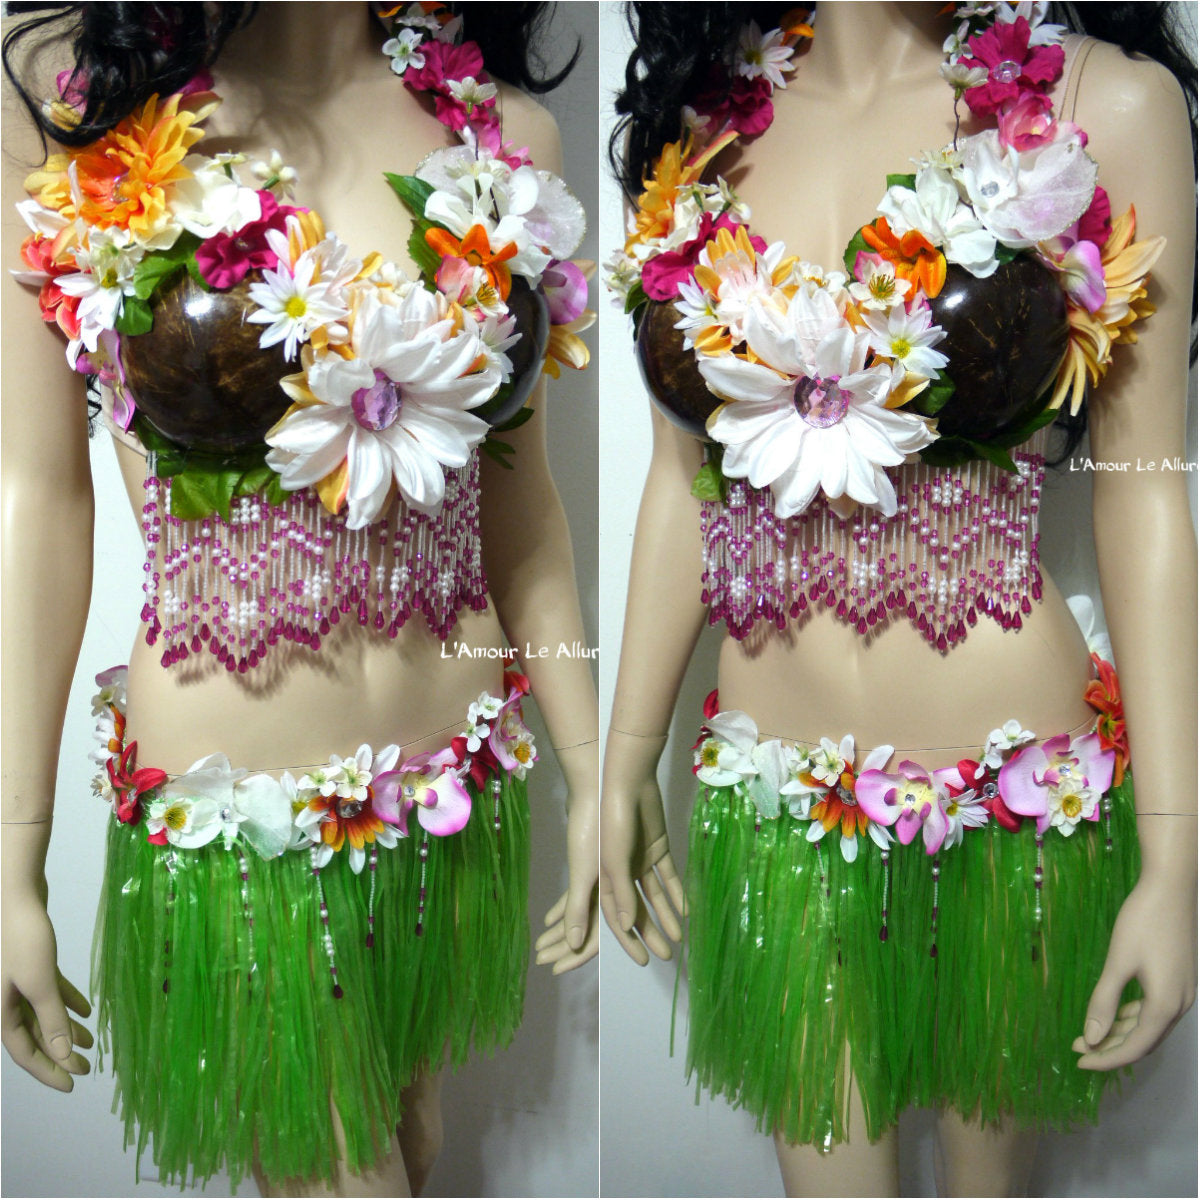 Tropical Hula Girl Coconut Flower Bra and Green Grass Skirt – L'Amour Le  Allure